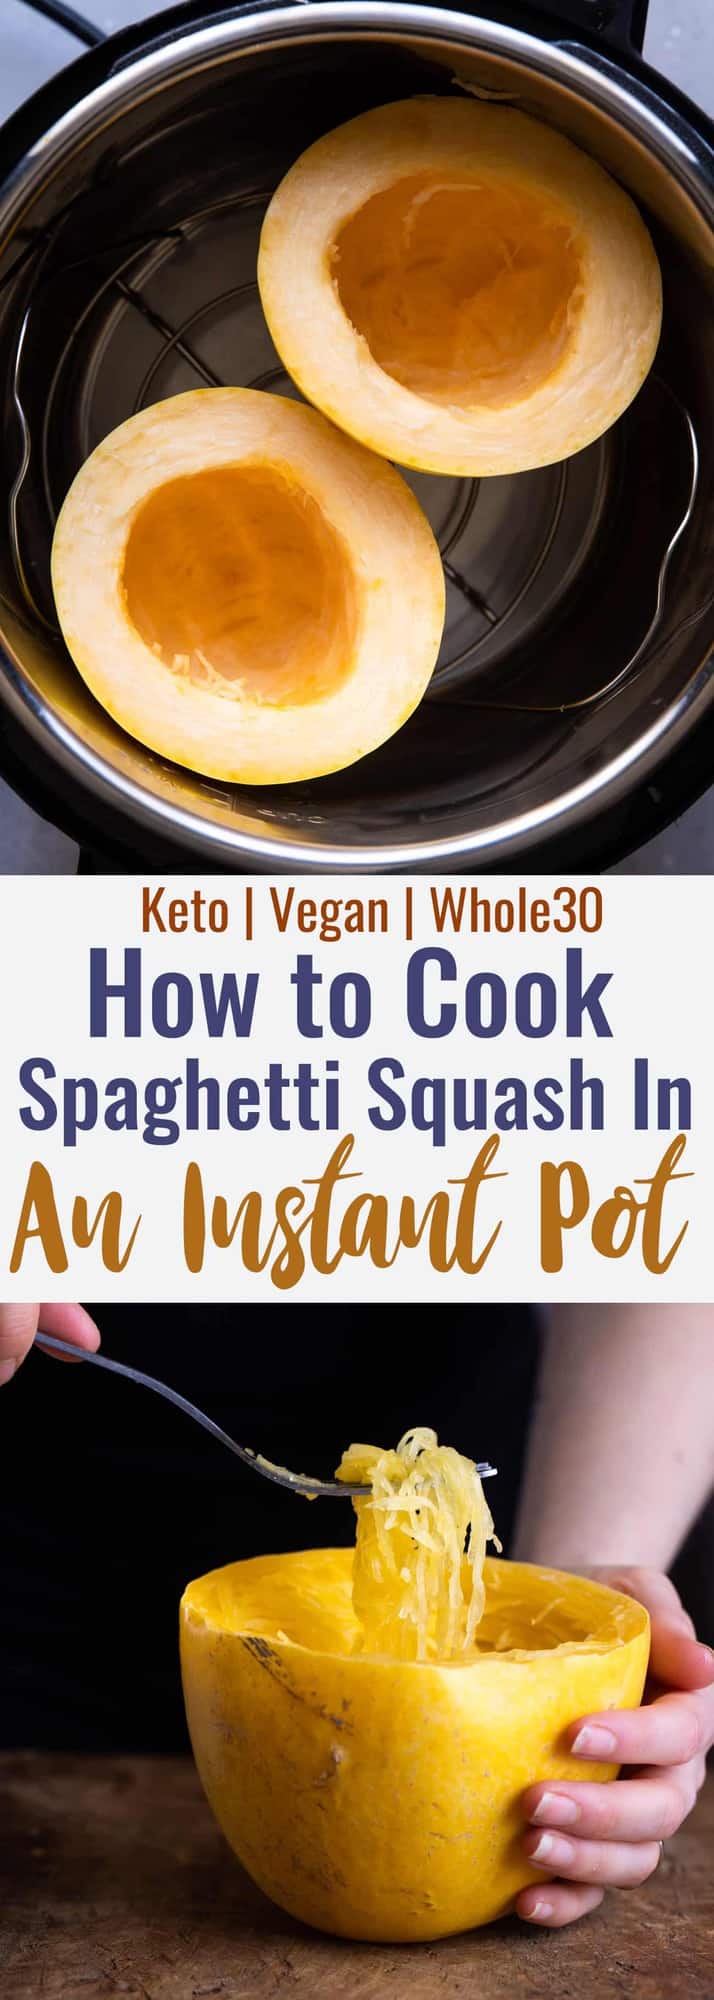 Instant Pot Spaghetti Squash - Learn how to cook Instant Pot Spaghetti Squash! It's super quick and easy, great for meal prep and low carb, gluten free, vegan and whole30 too! | #Foodfaithfitness | #Glutenfree #Paleo #Lowcarb #Keto #InstantPot